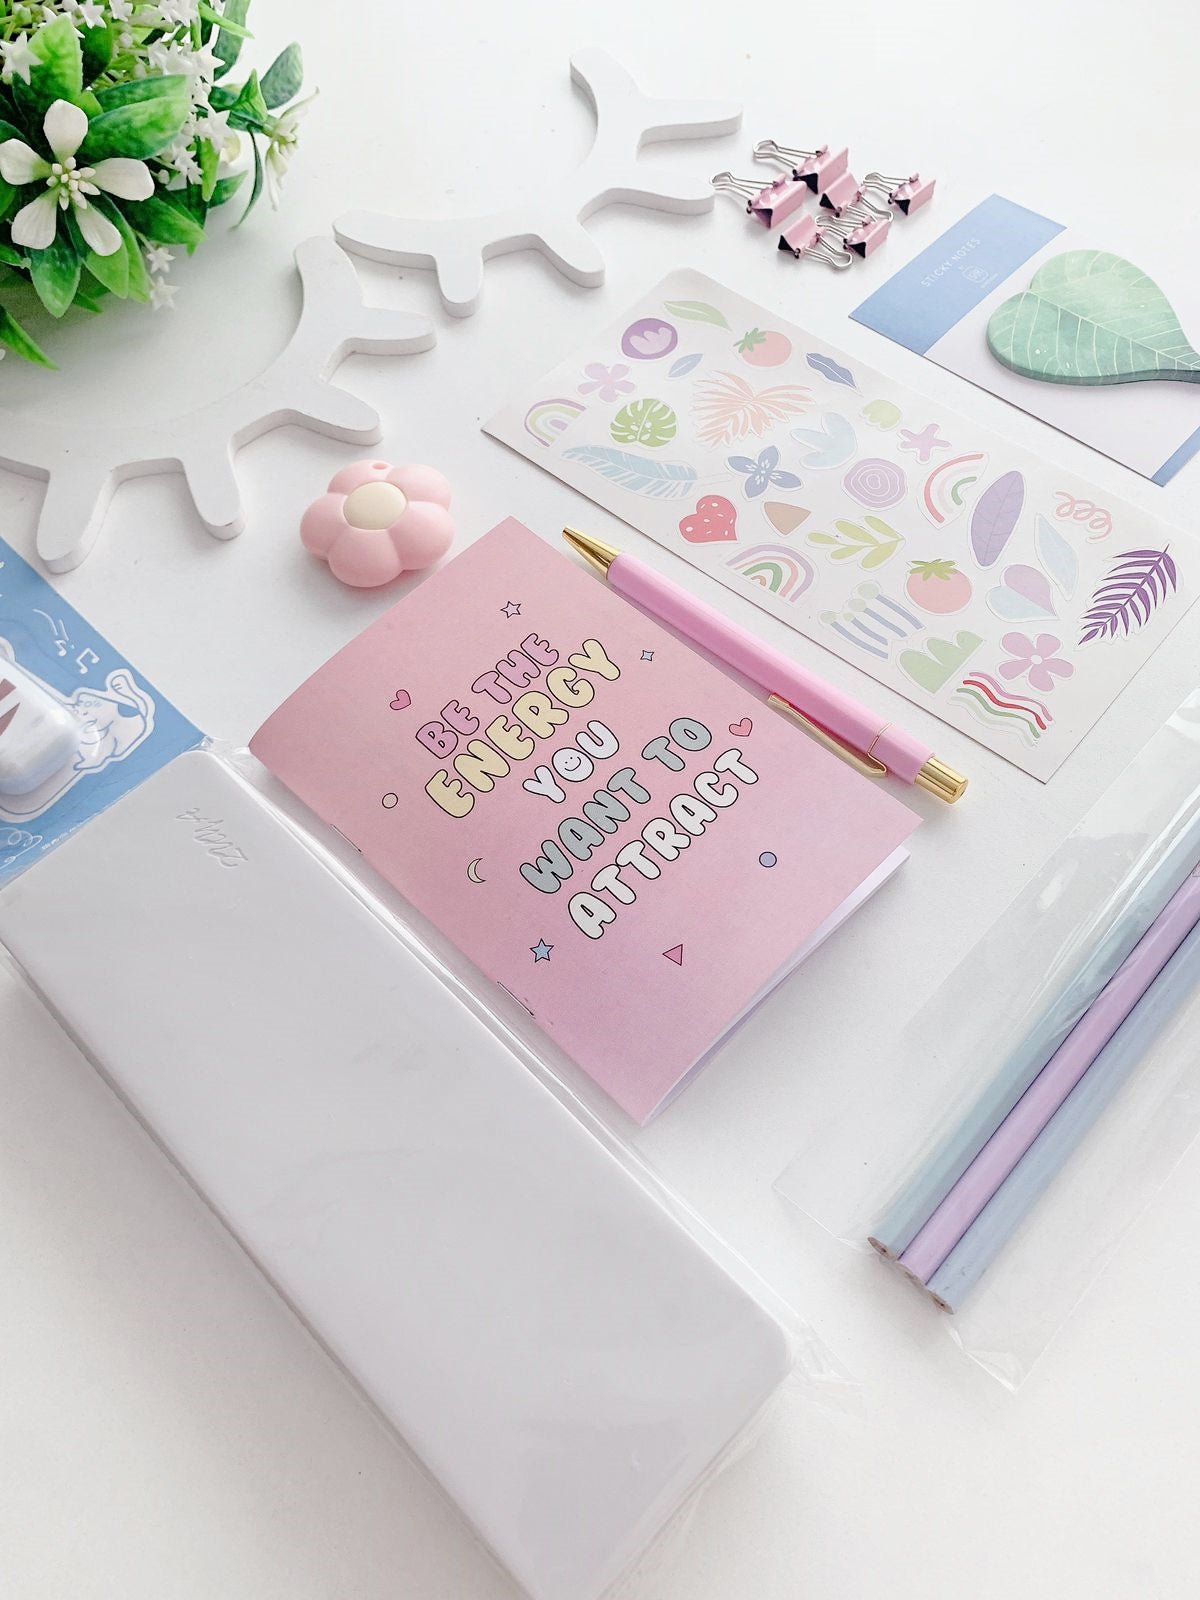 Primary School Stationery Set Wholesale Small Prizes Start School  Children's Gifts Kindergarten School Supplies Gift Box - Stationery Set -  AliExpress